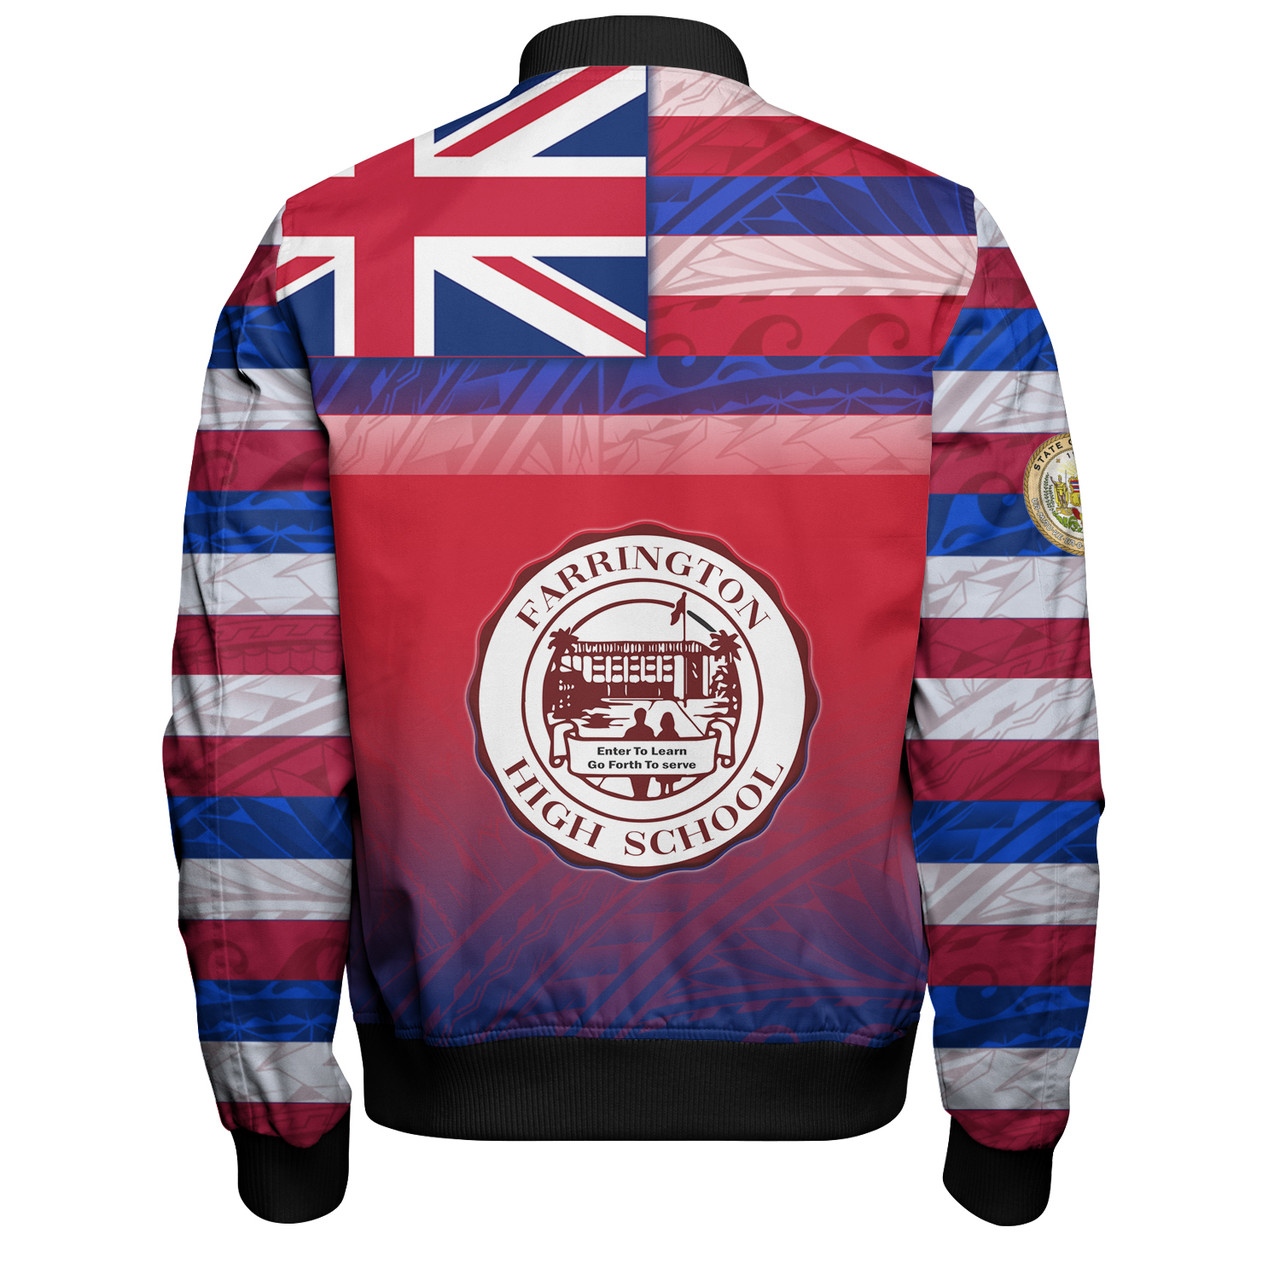 Hawaii Farrington High School Bomber Jacket Flag Color With Traditional Patterns